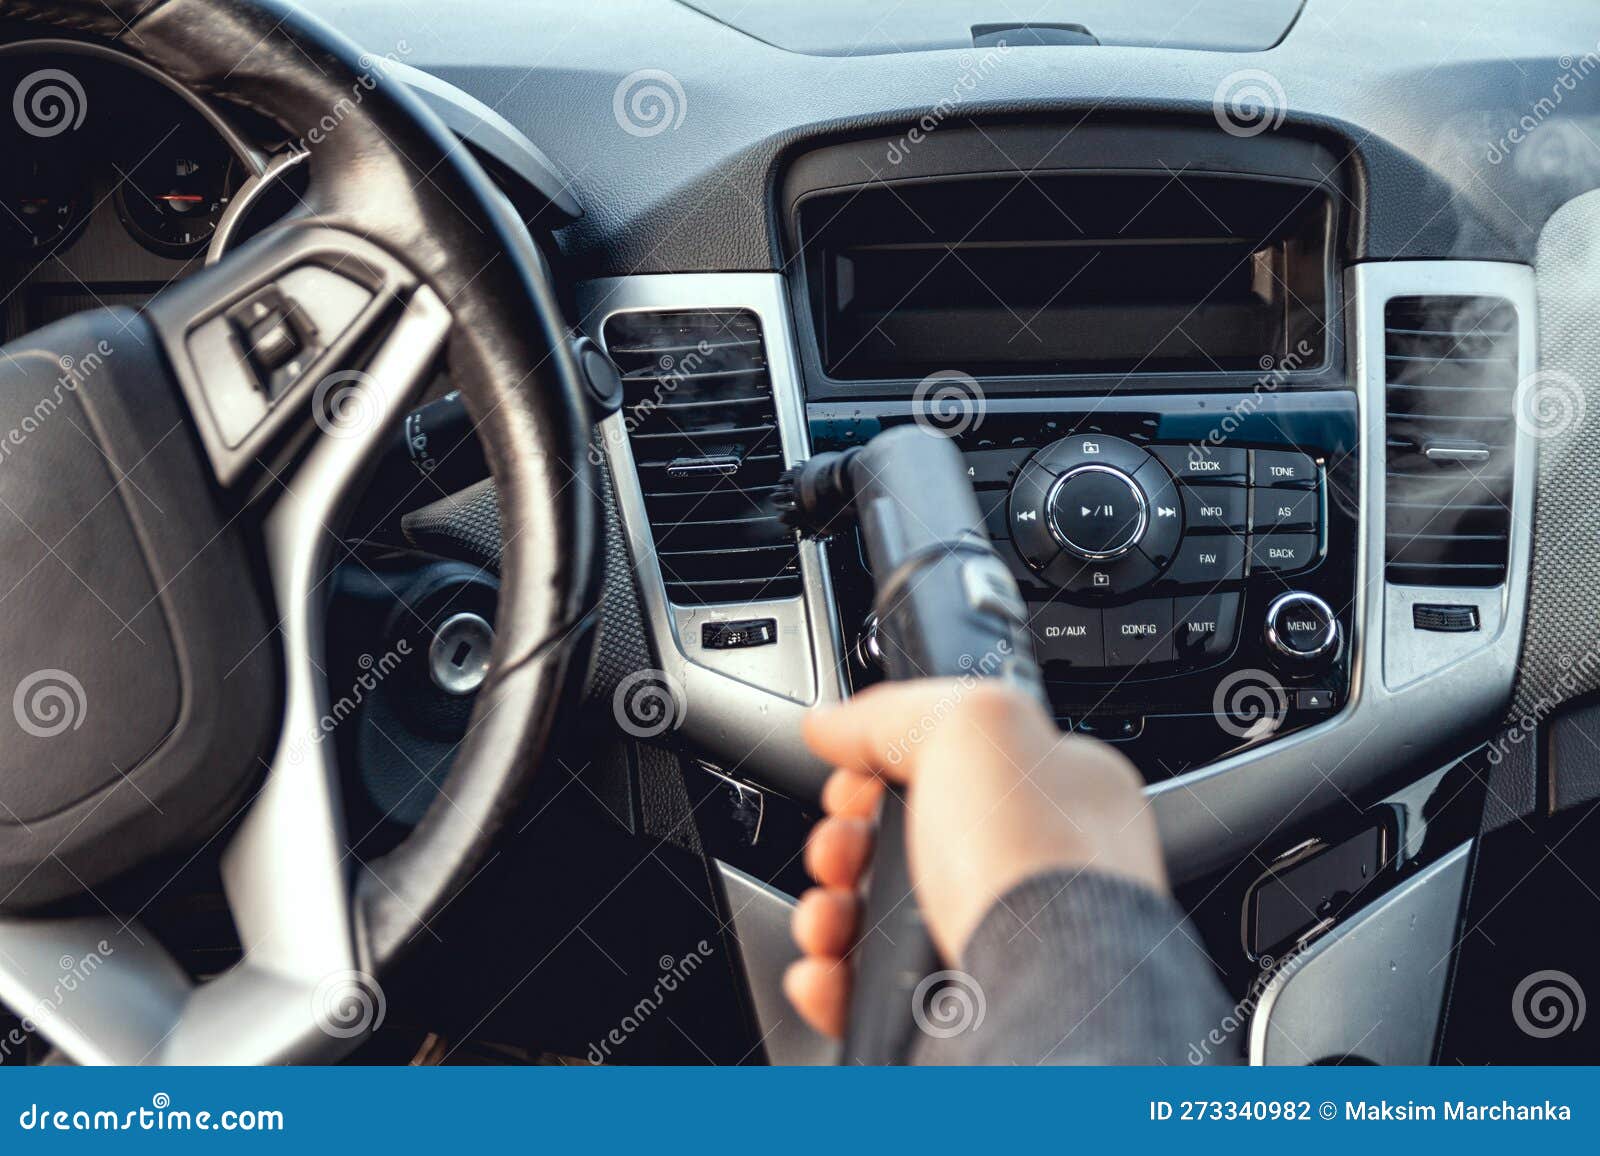 cleaning and disinfecting by steam of the car interior and car s